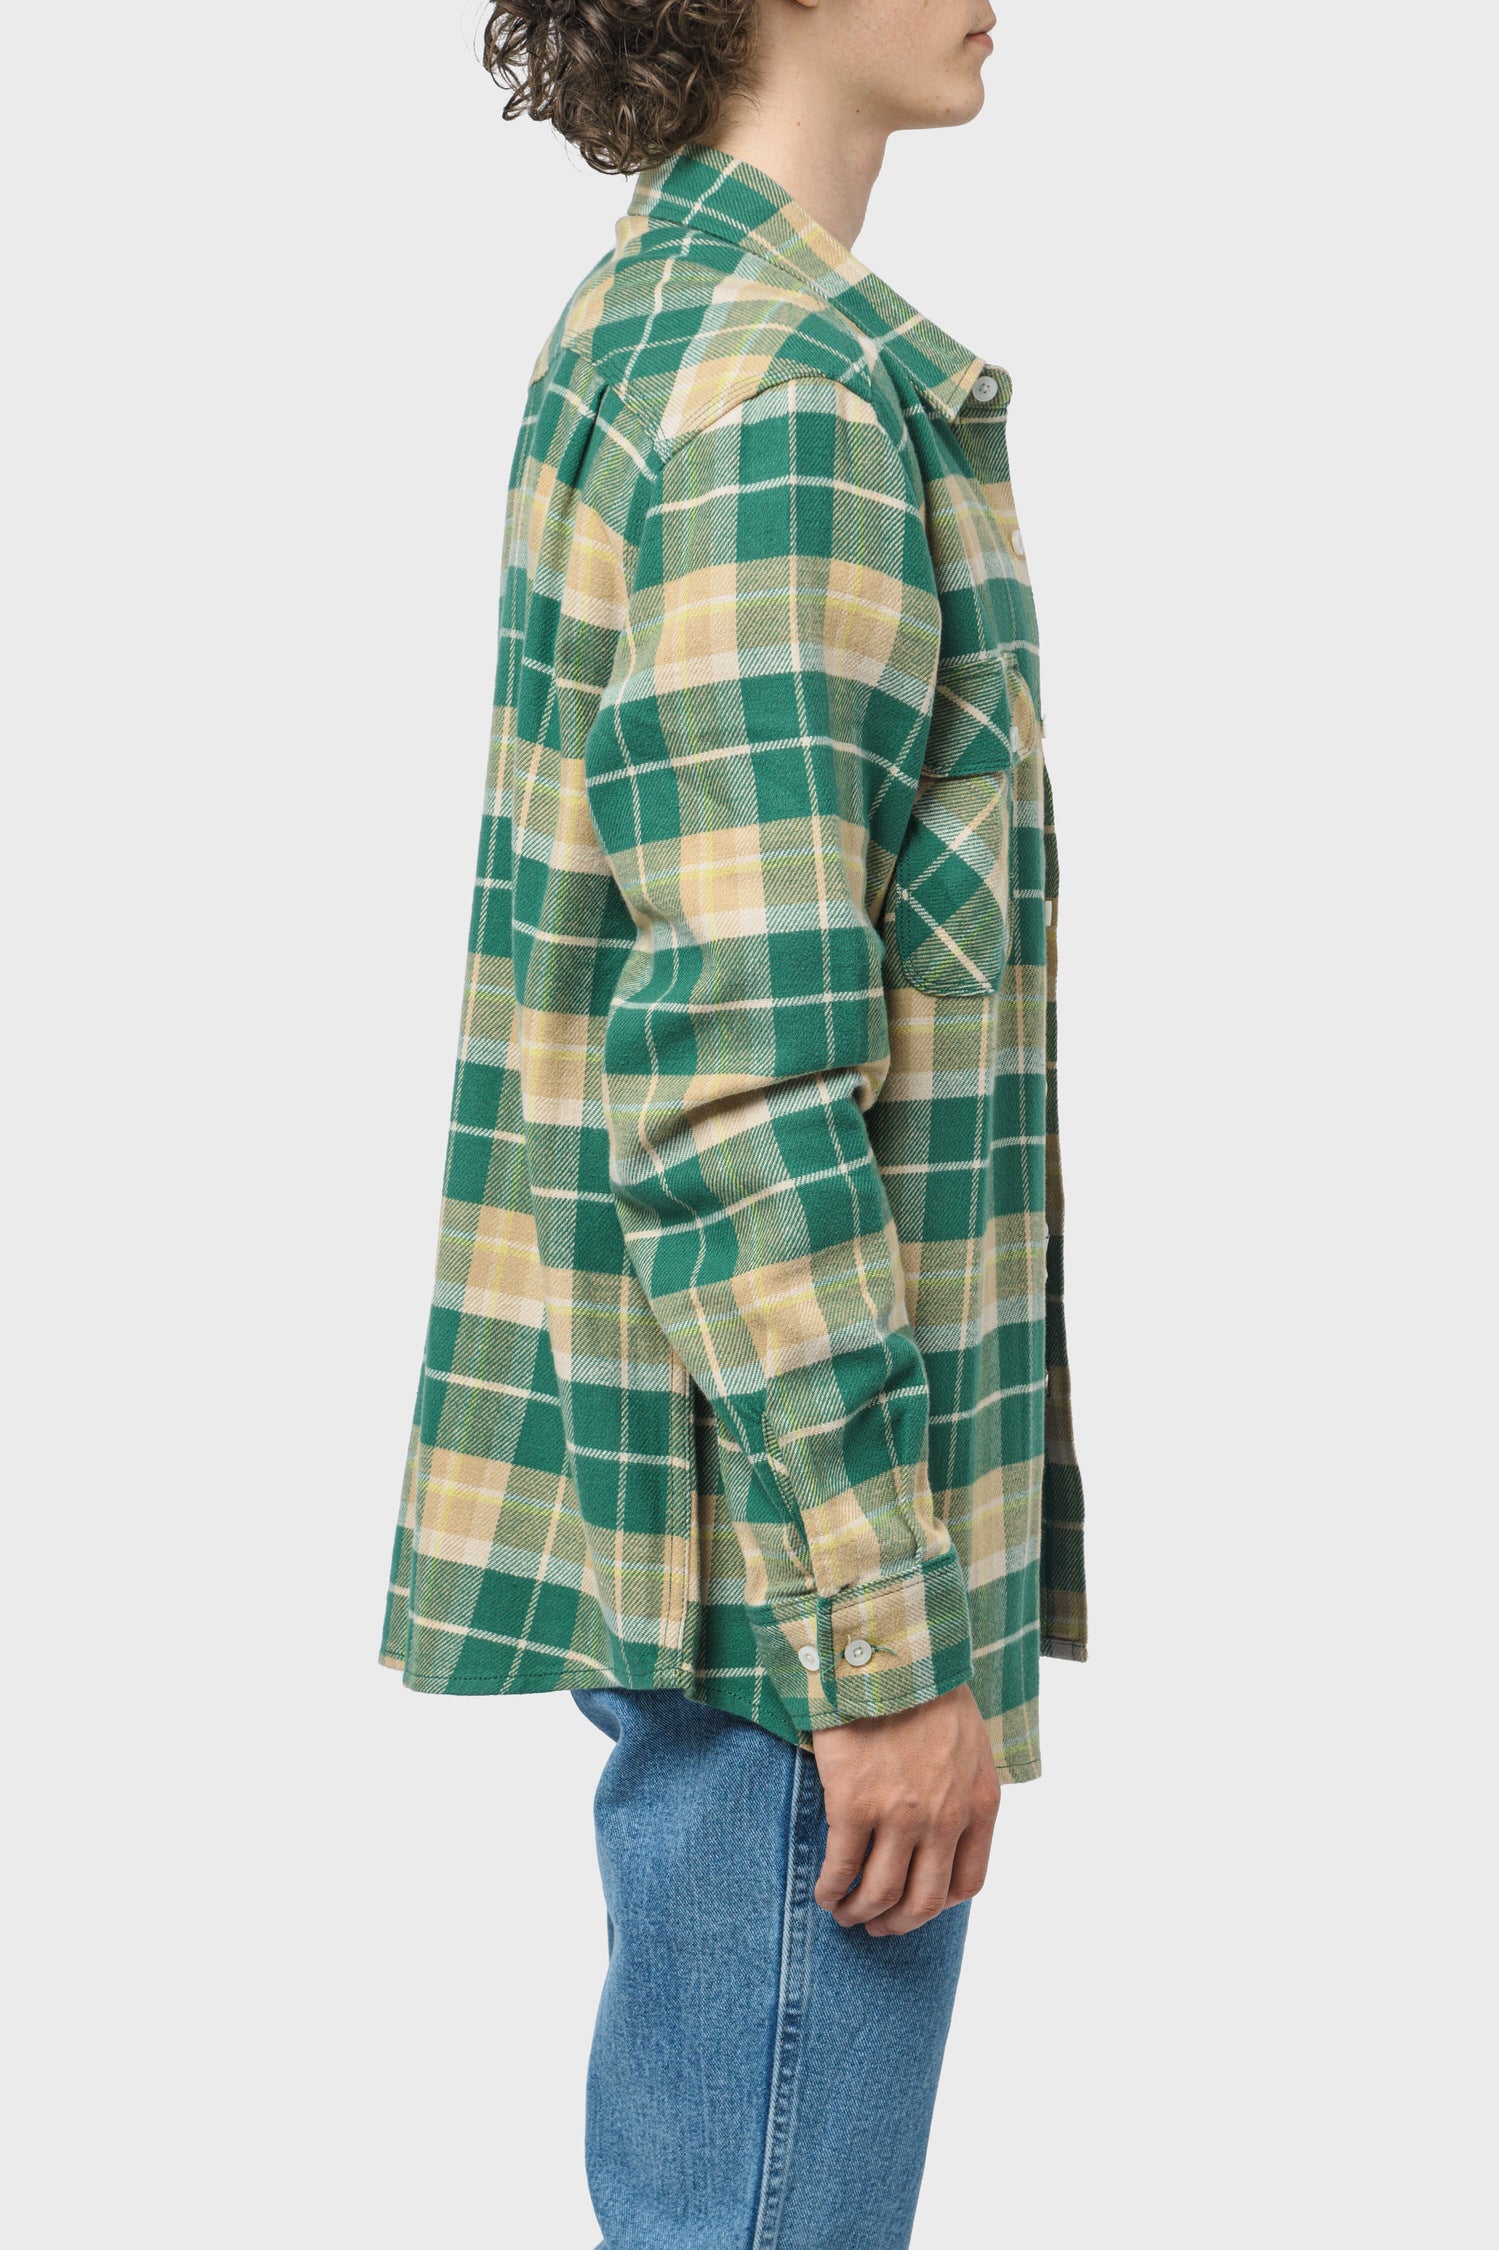 Men's Brixton Bowery L/S Flannel in Washed Pine Needle & Gold